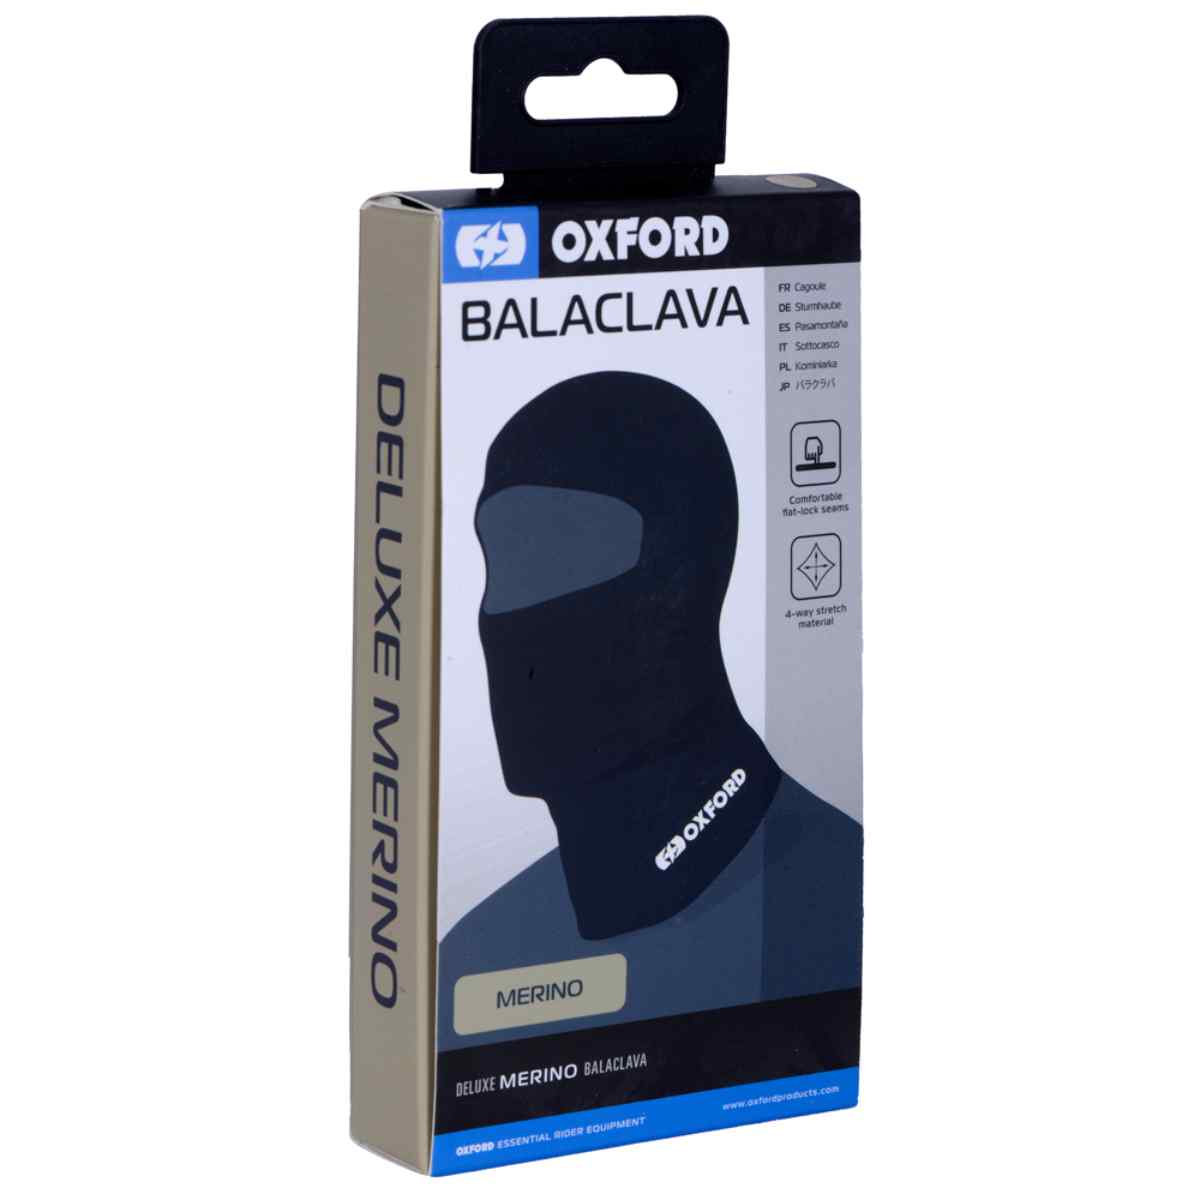 Oxford Deluxe Balaclava Merino: A breathable thermal baselayer